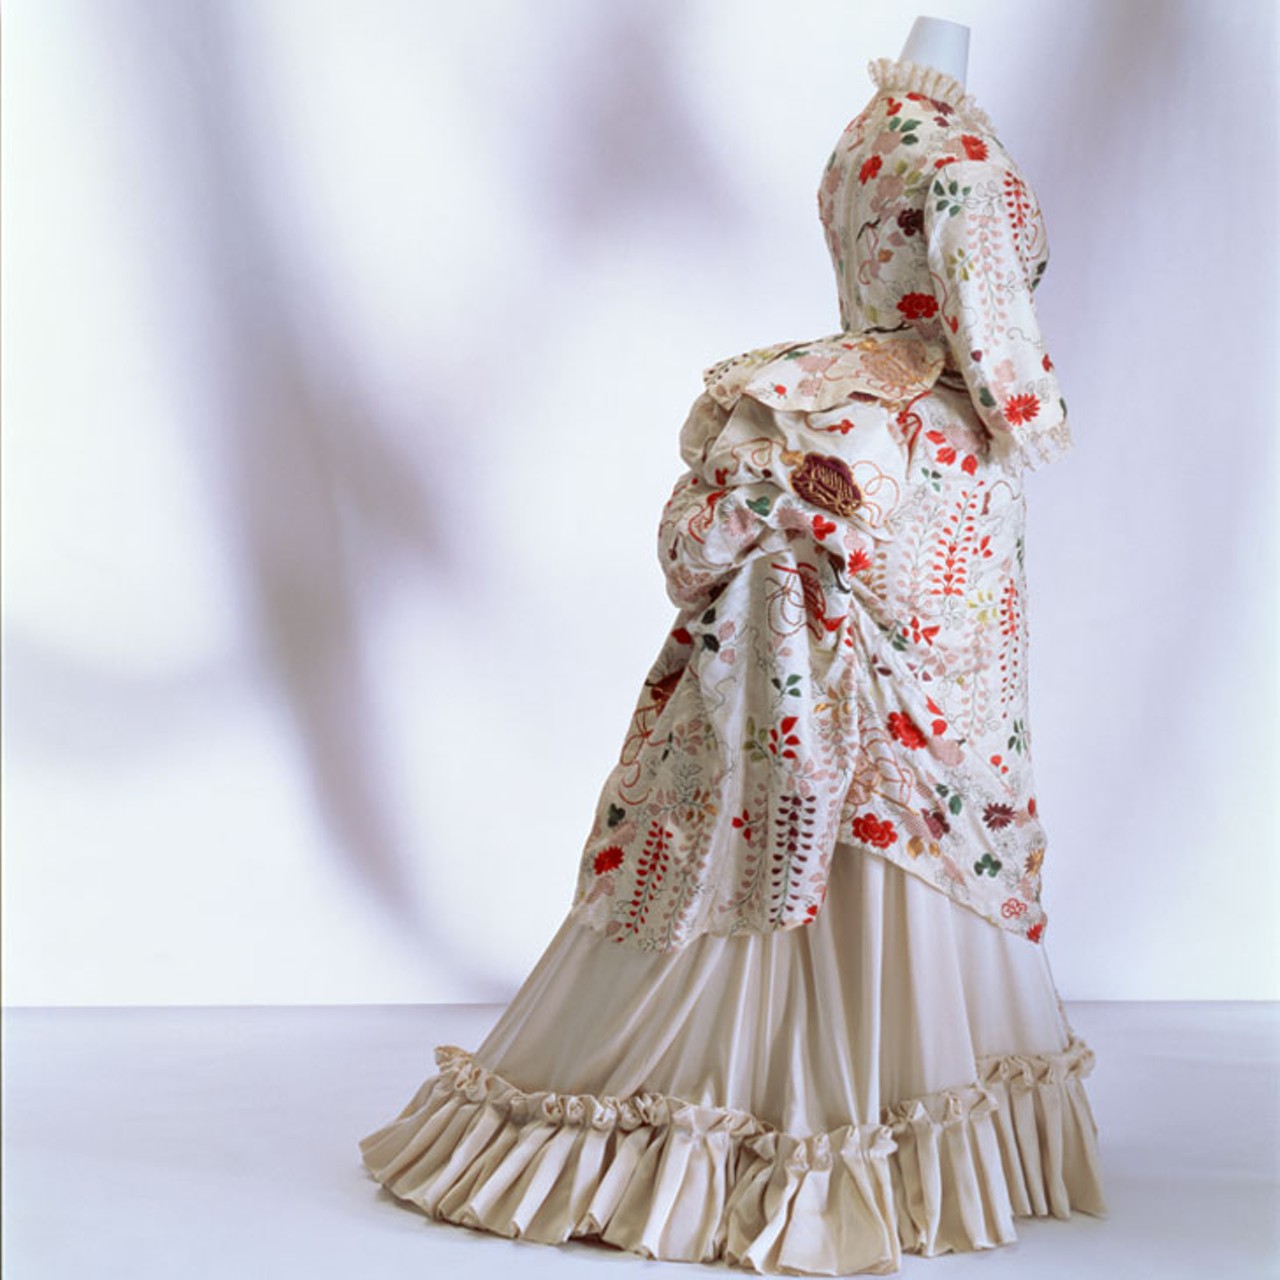 Misses Turner Court Dress Makers (active late 19th century), London&nbsp;&#151; dress circa 1875
The Kyoto Costume Institute
Photo by Richard Haughton